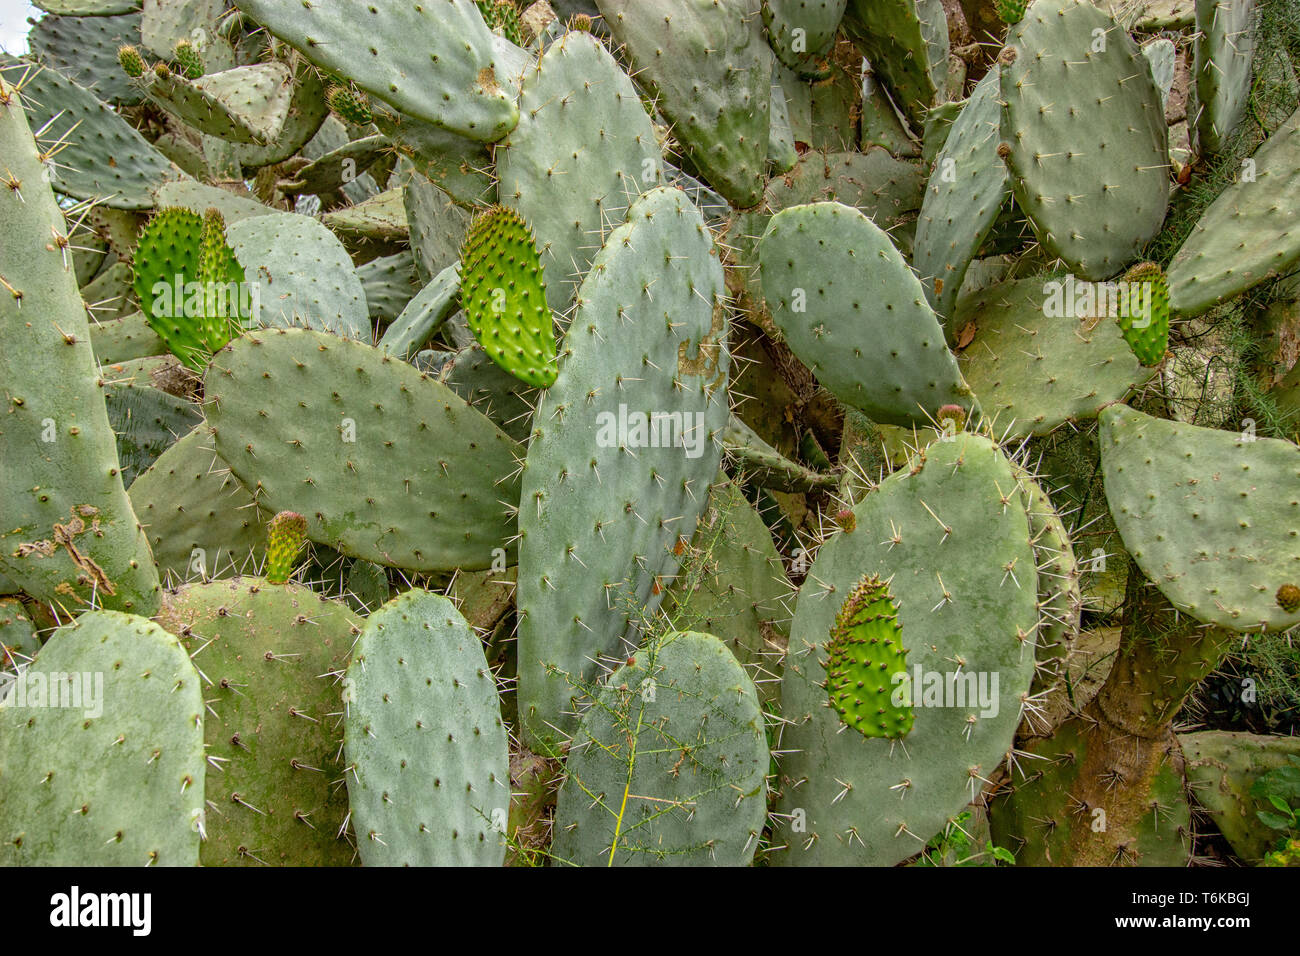 Close up of a large Prickly Pear Cactus (Opuntia) growing in the wild countryside of Rabat in Morocco Stock Photo